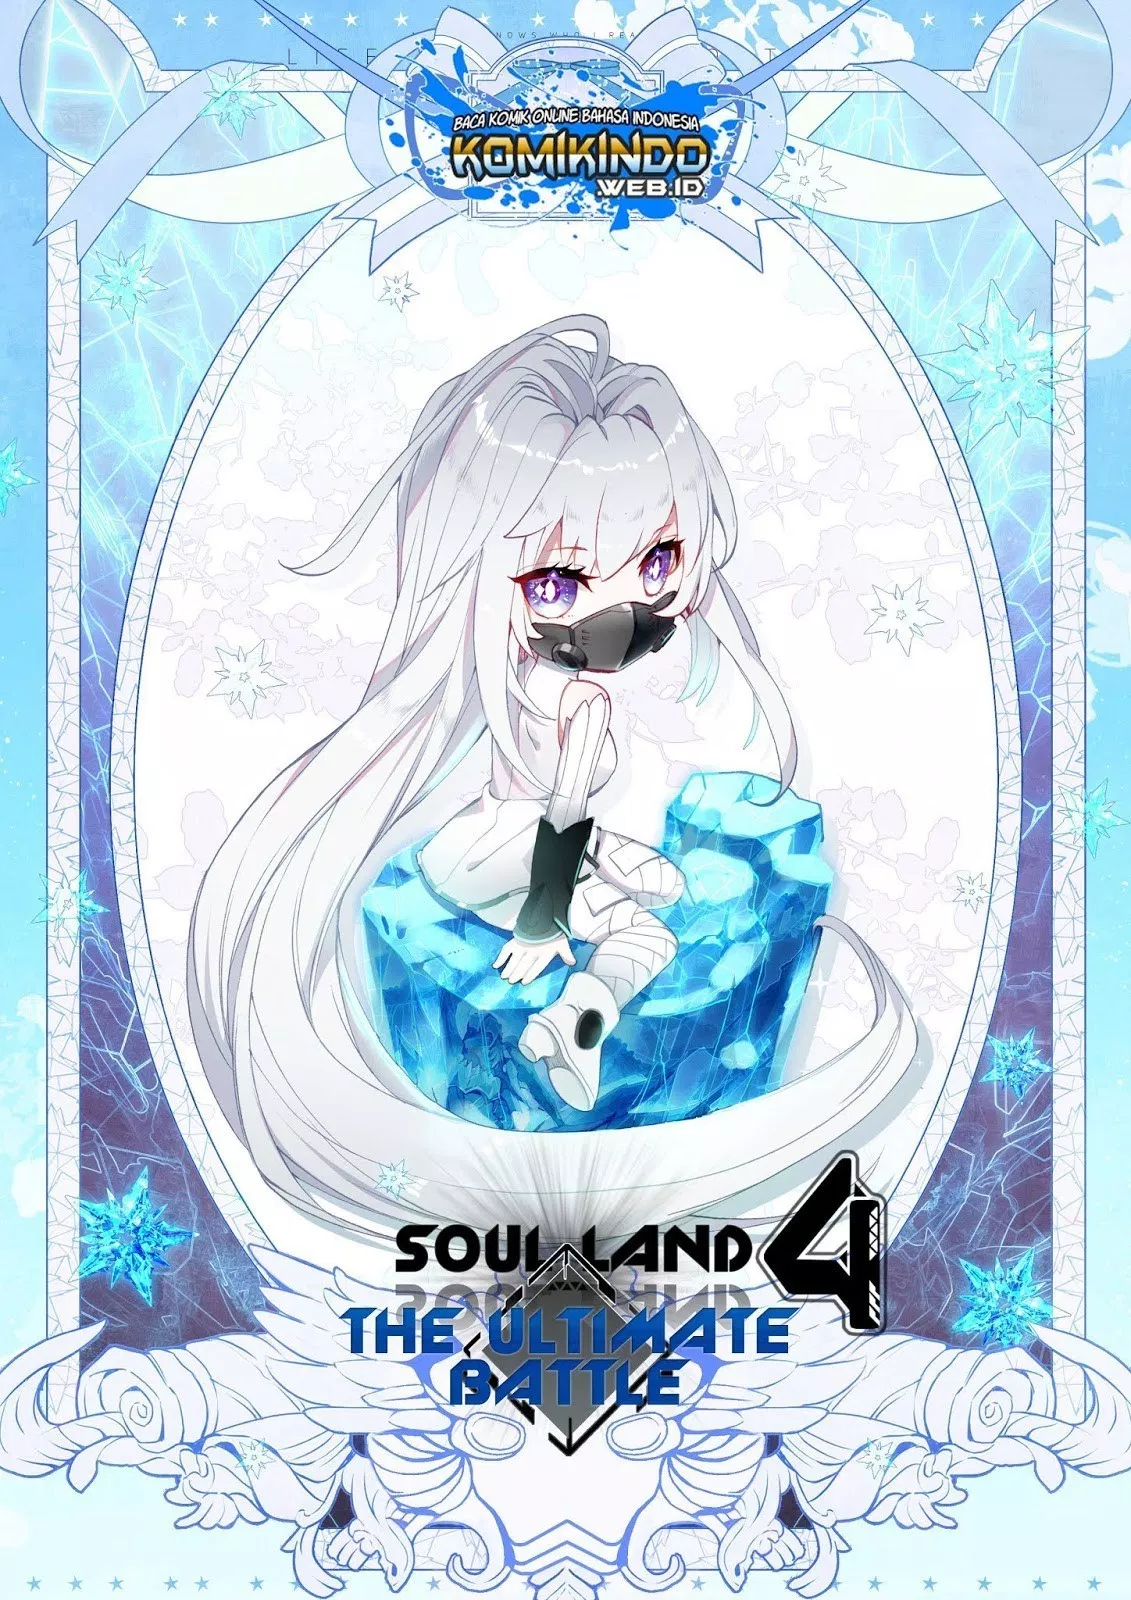 Soul Land IV – The Ultimate Combats Chapter 15.5